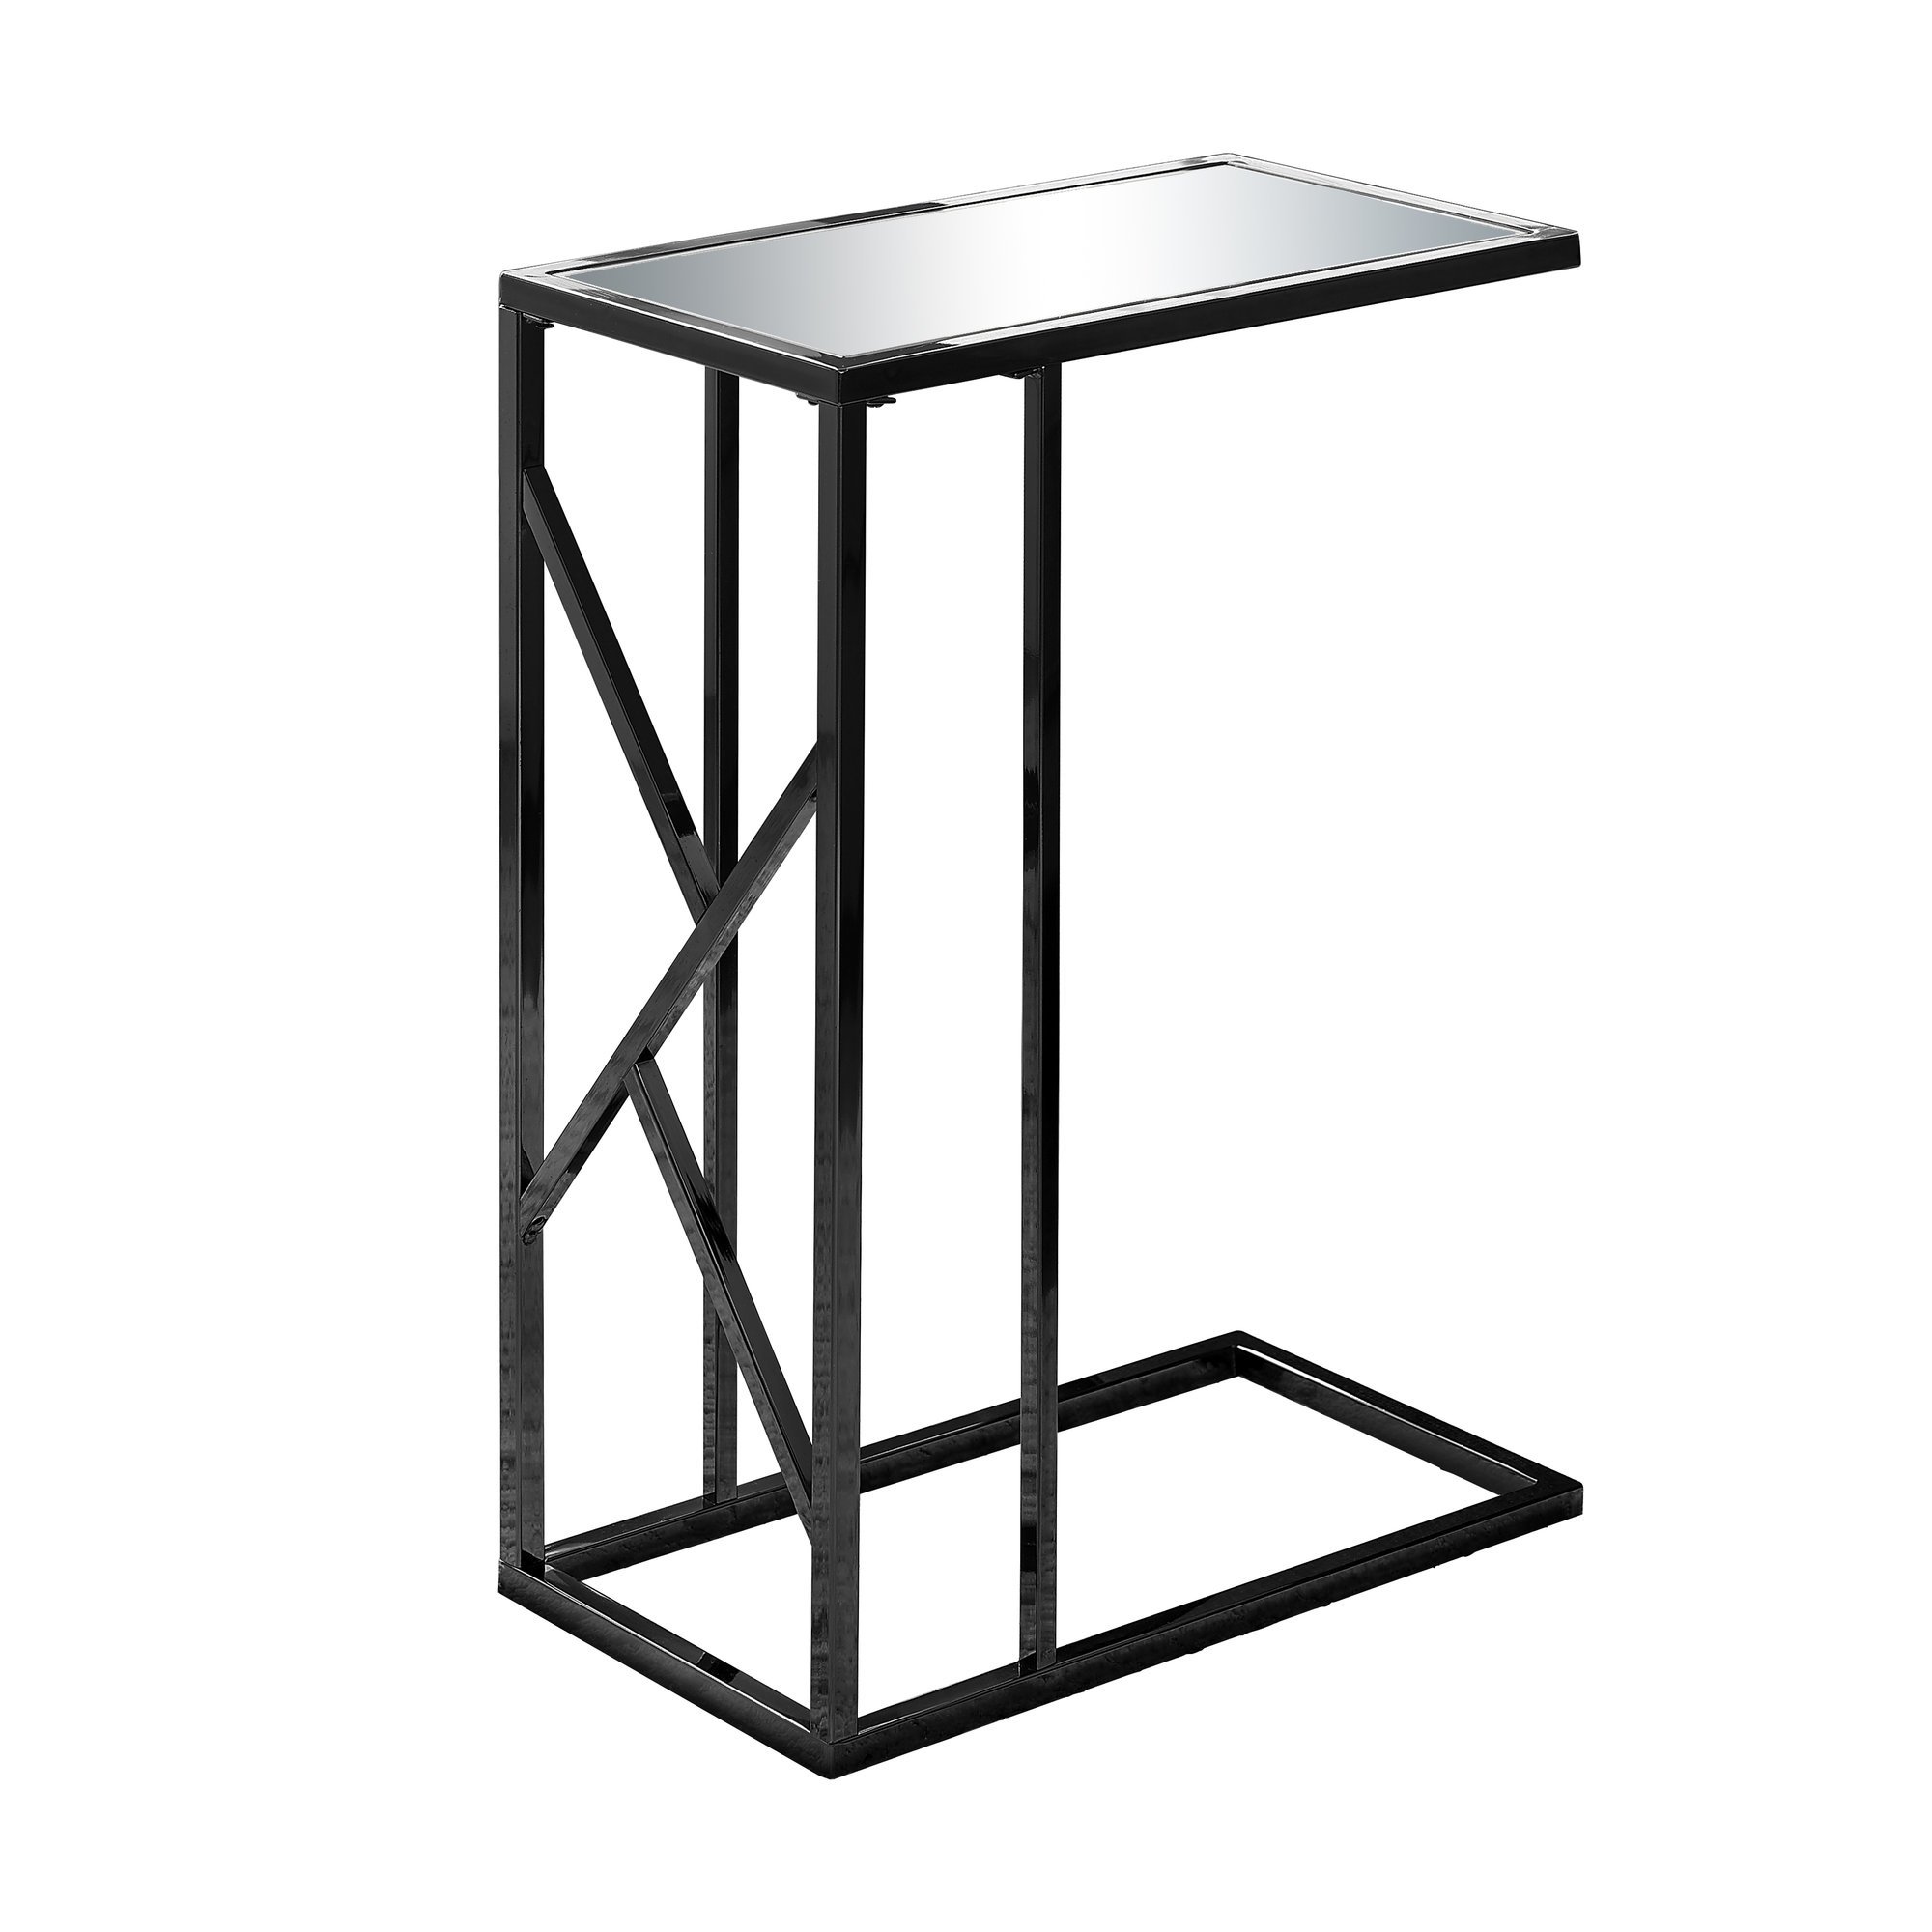 accent table black nickel metal mirror top free shipping today extra long shower curtain target foot outdoor umbrella craftsman style lighting west elm mid century tripod floor